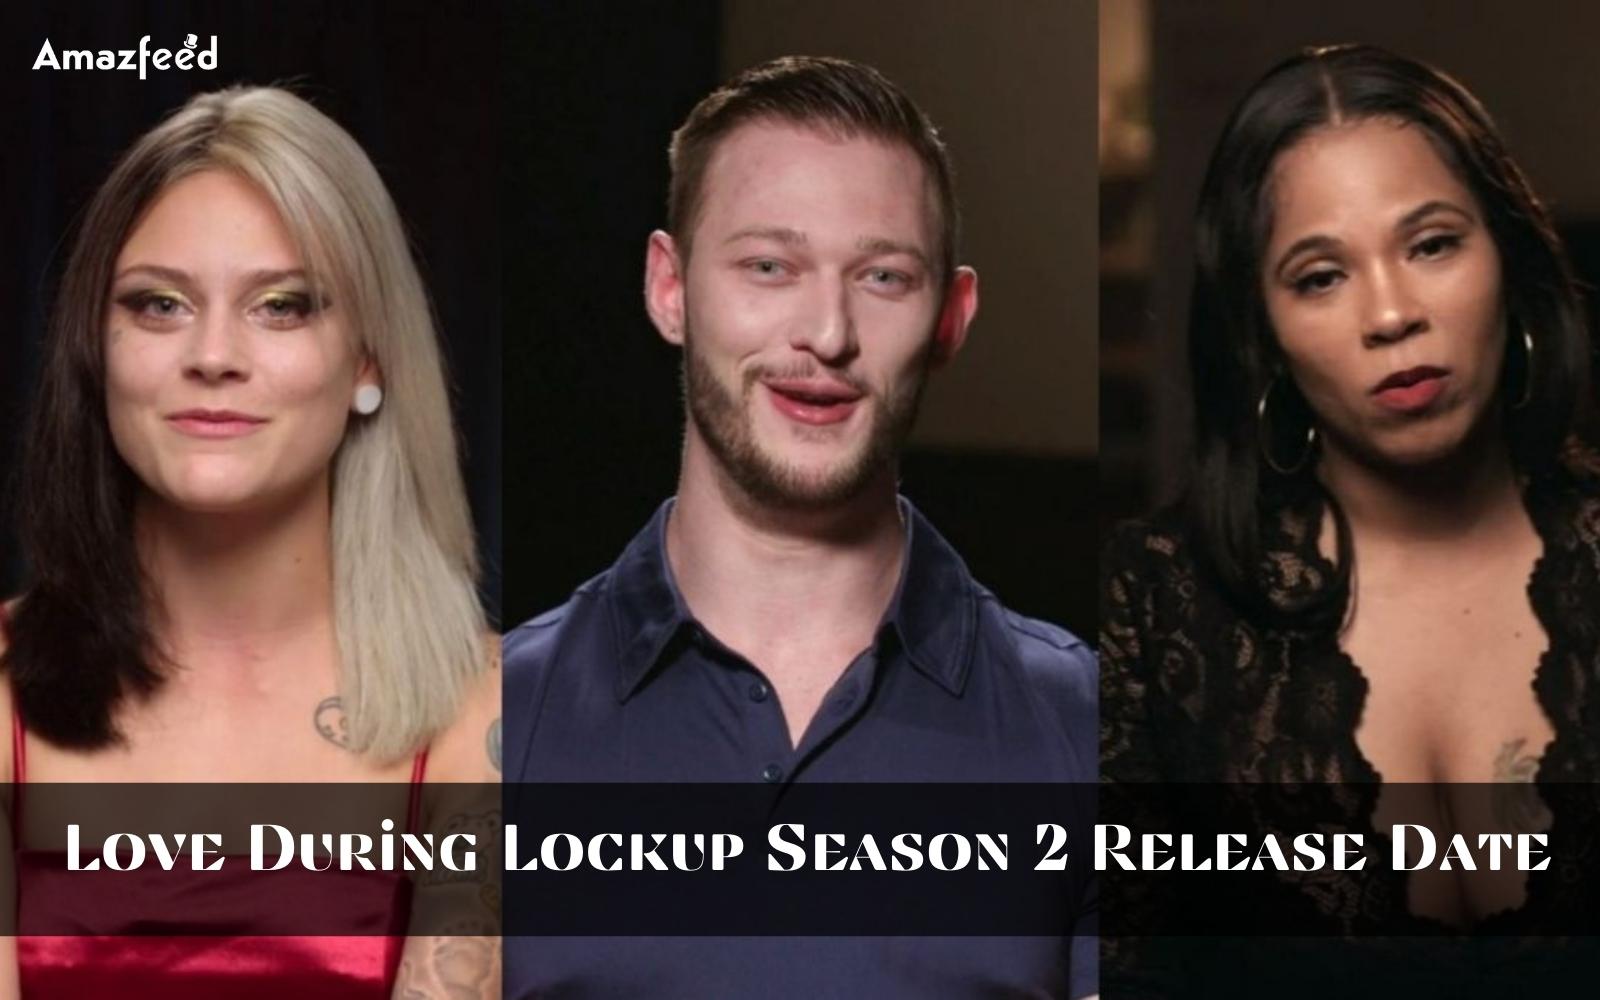 Love During Lockup Season 2 Release Date will it ever happen, or will